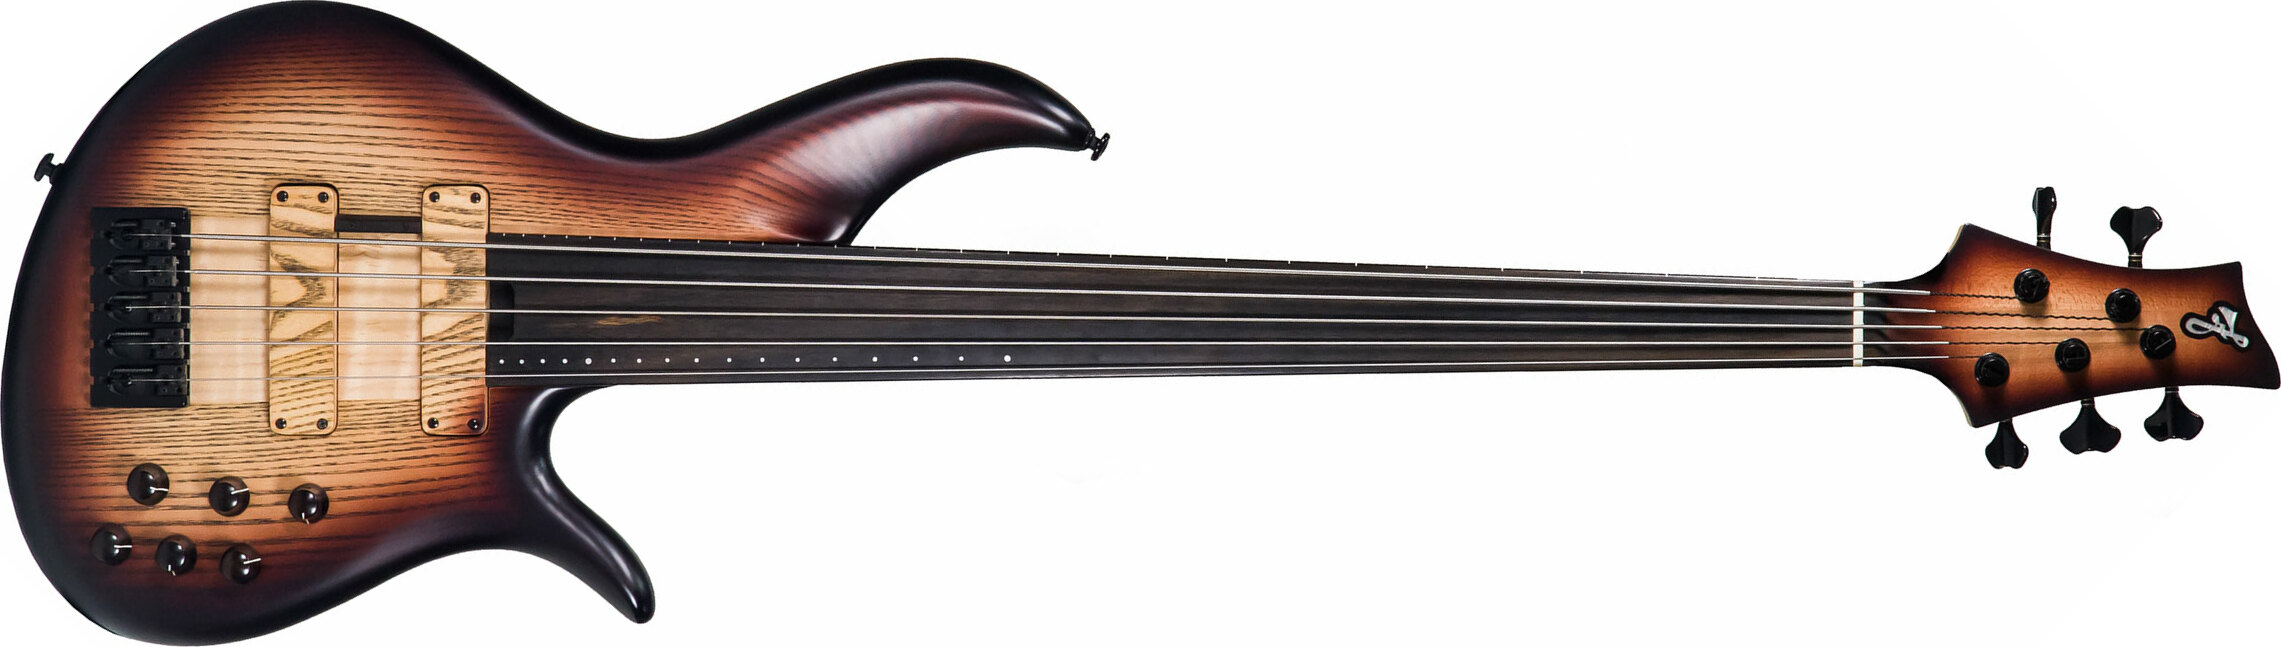 F Bass Bnf5 Fretless 5 String Ebony Fretboard - Brown Burst Satin - Solid body electric bass - Main picture